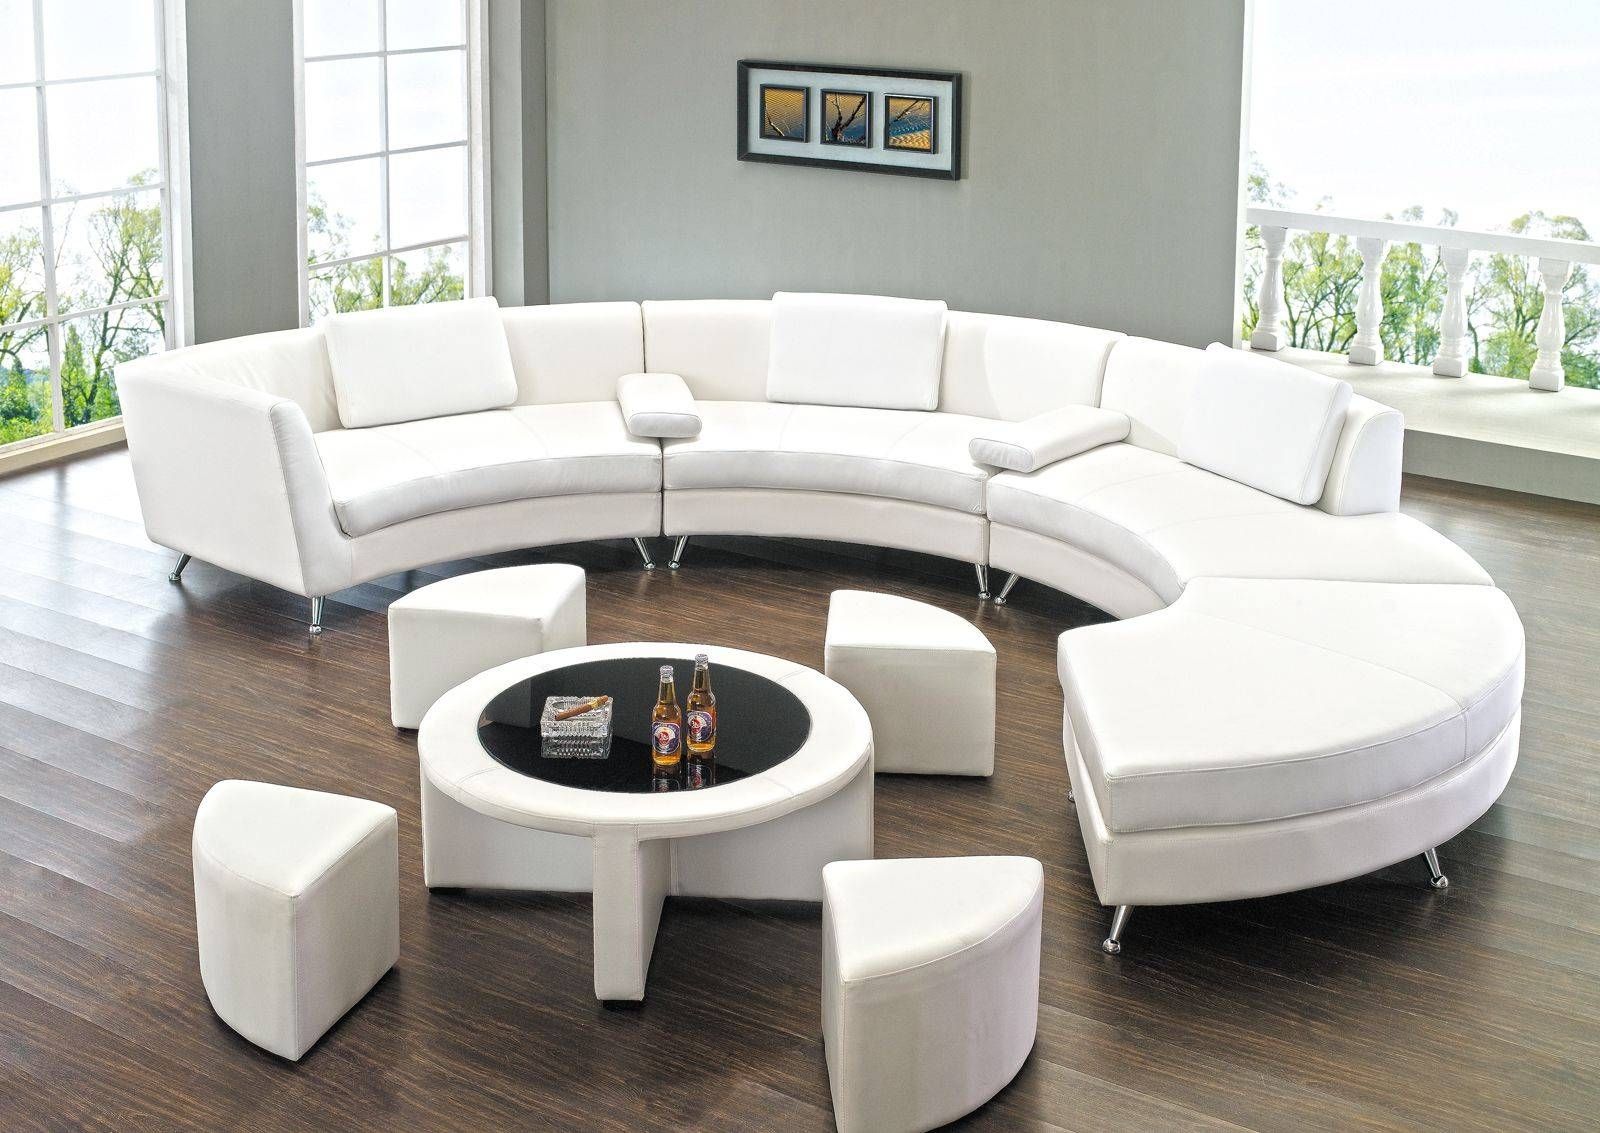 Round Sectional Sofa For Unique Seating Alternative – Traba Homes In Round Sectional Sofa (View 4 of 30)